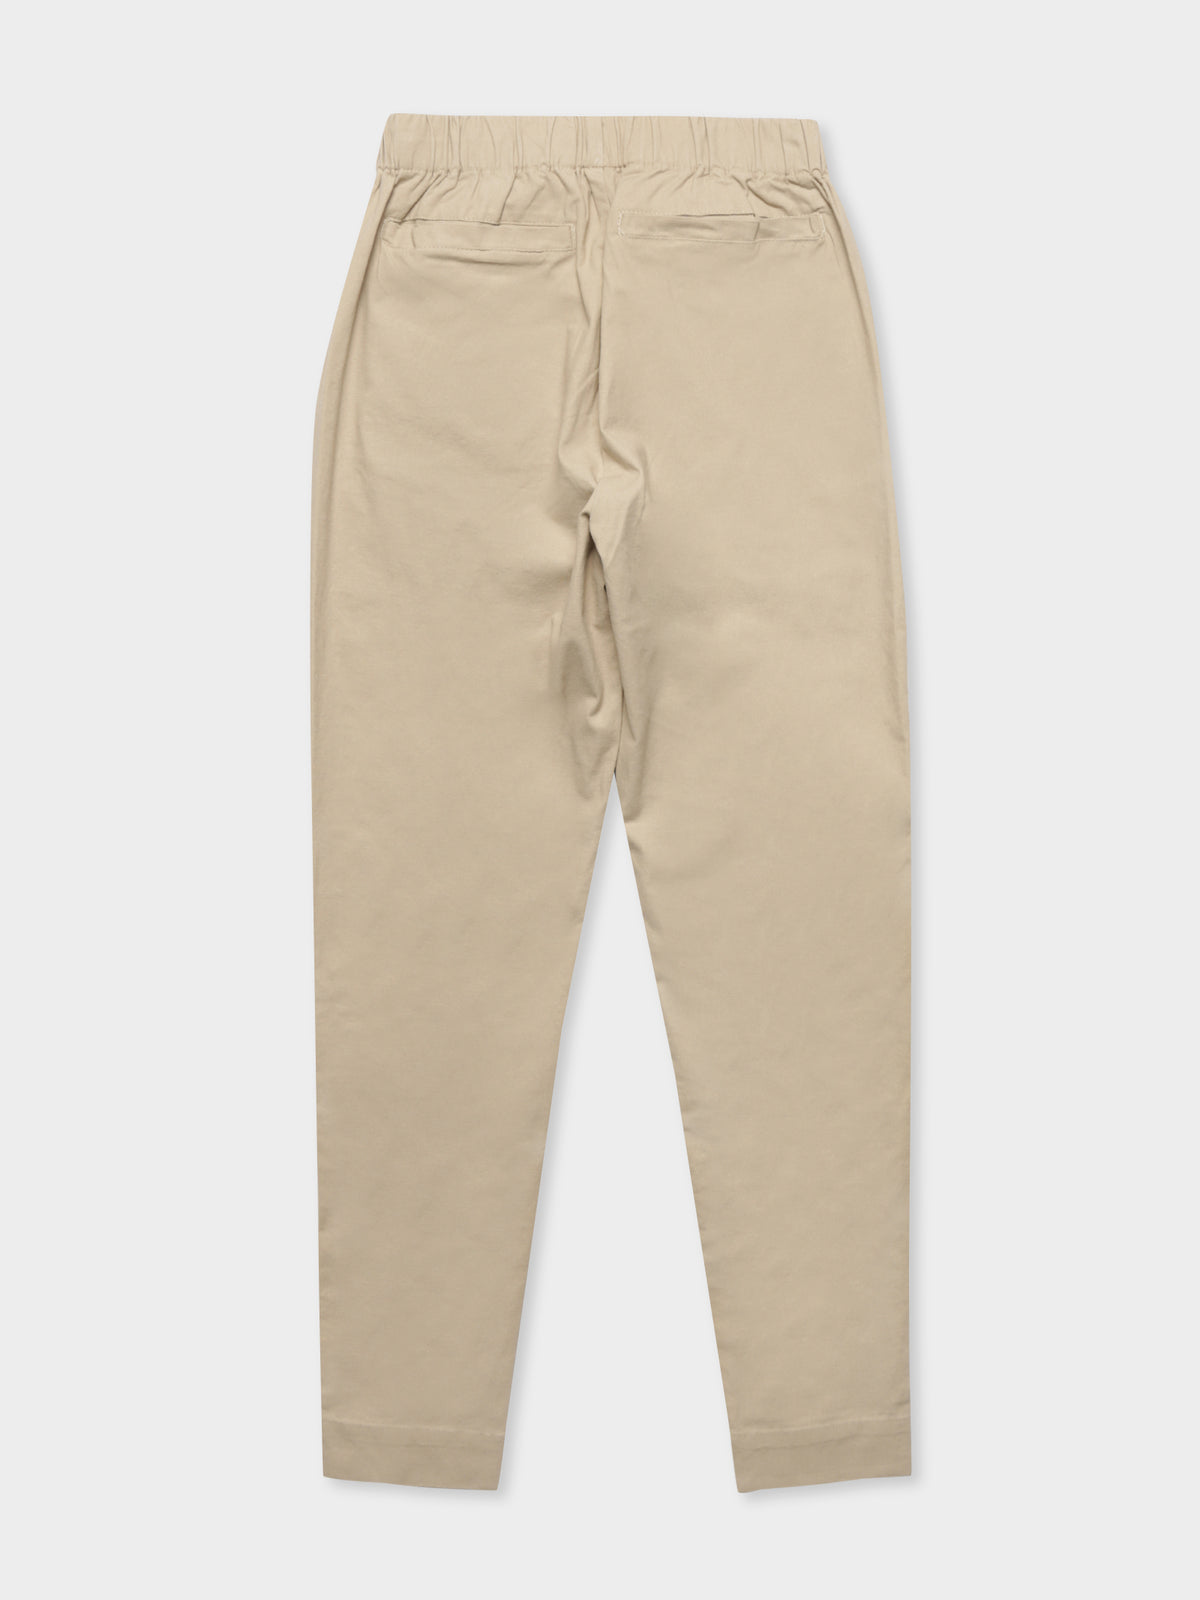 Pitfield Relaxed Track Pants in Sand